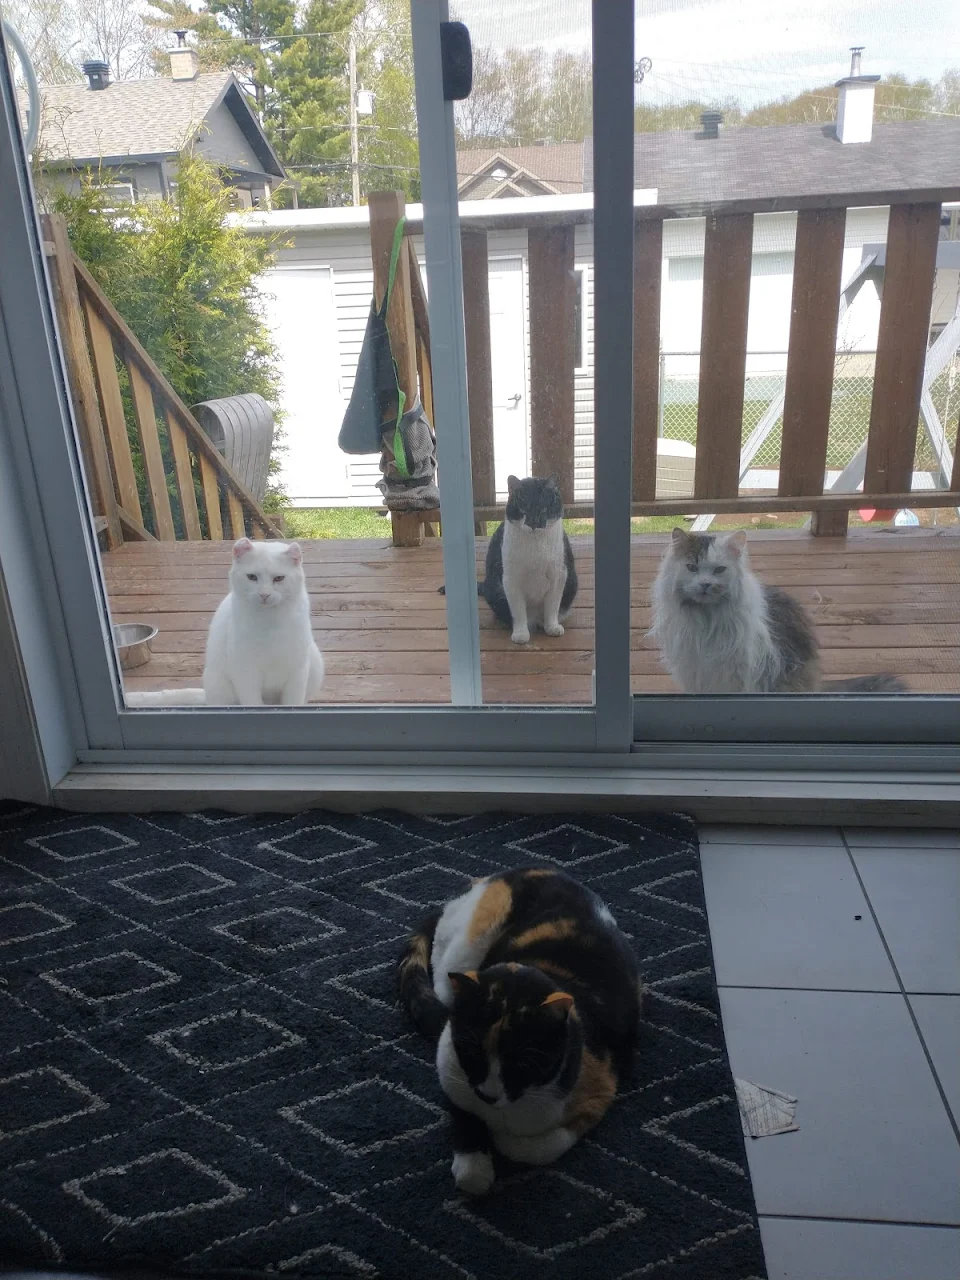 So today I found my cats positioned so conveniently behind my other unsuspecting cat... This might be a ritual. Either way, this is a great meme template I'm definetly using later.